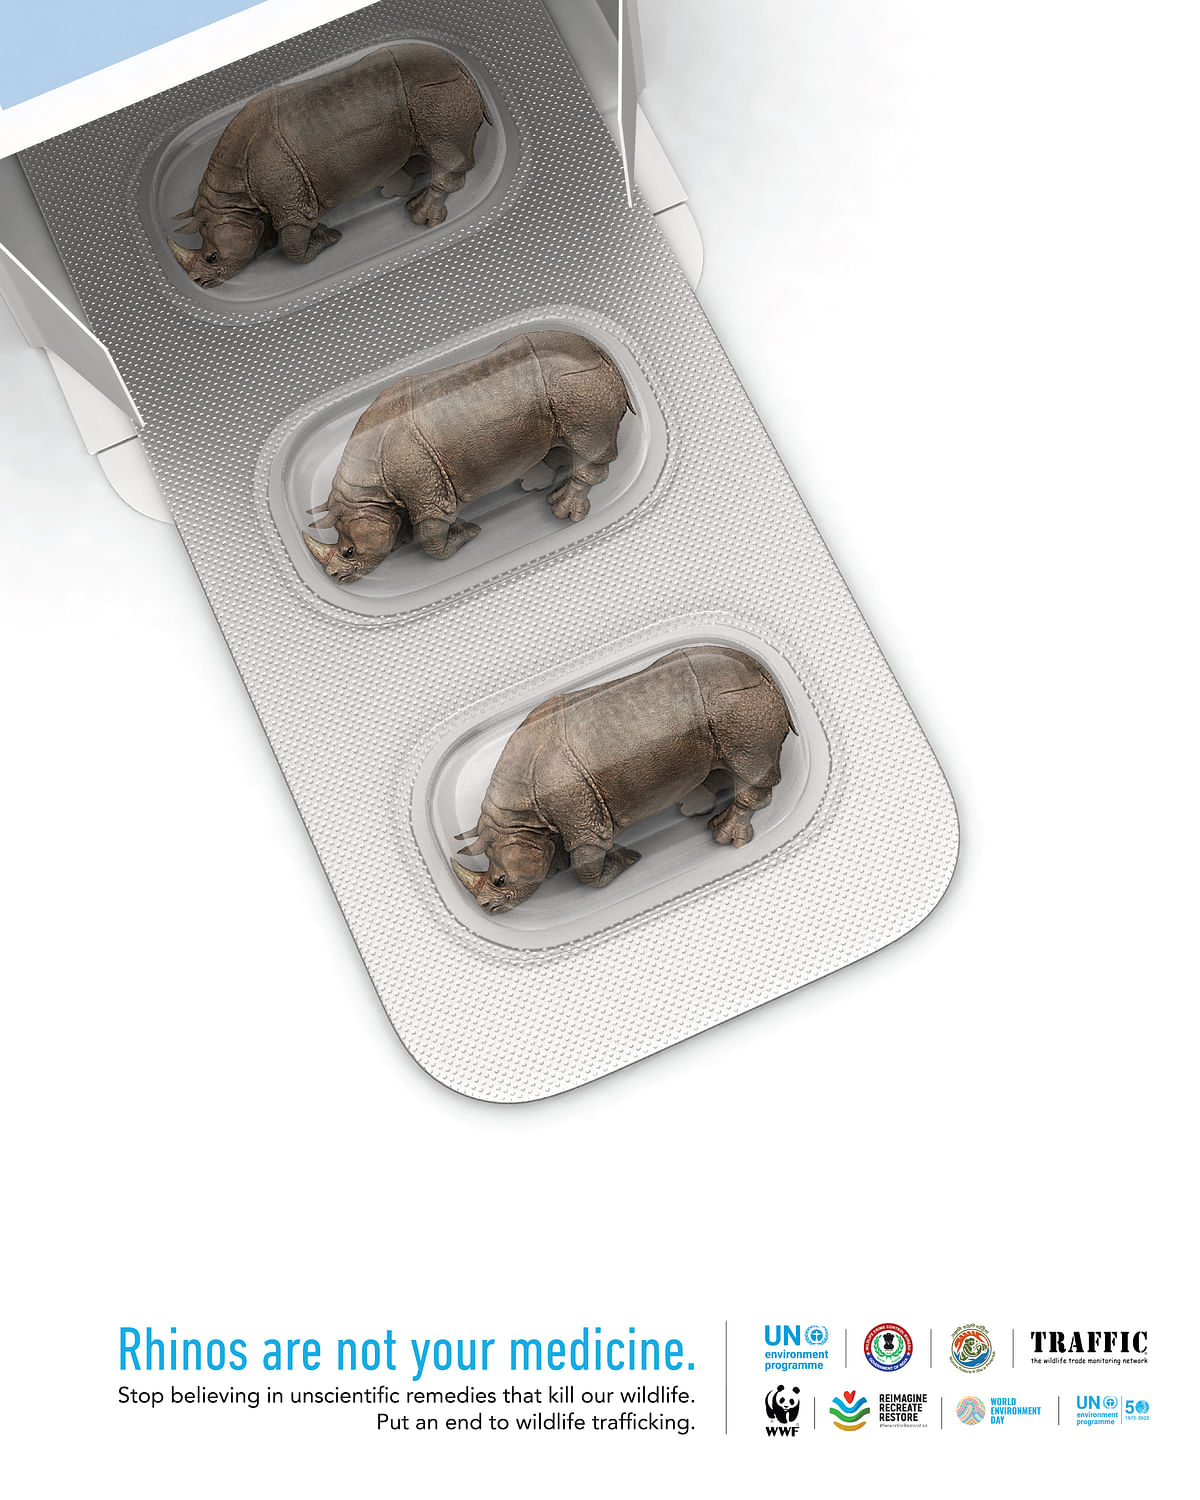 Ogilvy takes on killing of wildlife due to superstitious beliefs in two campaigns for UNEP